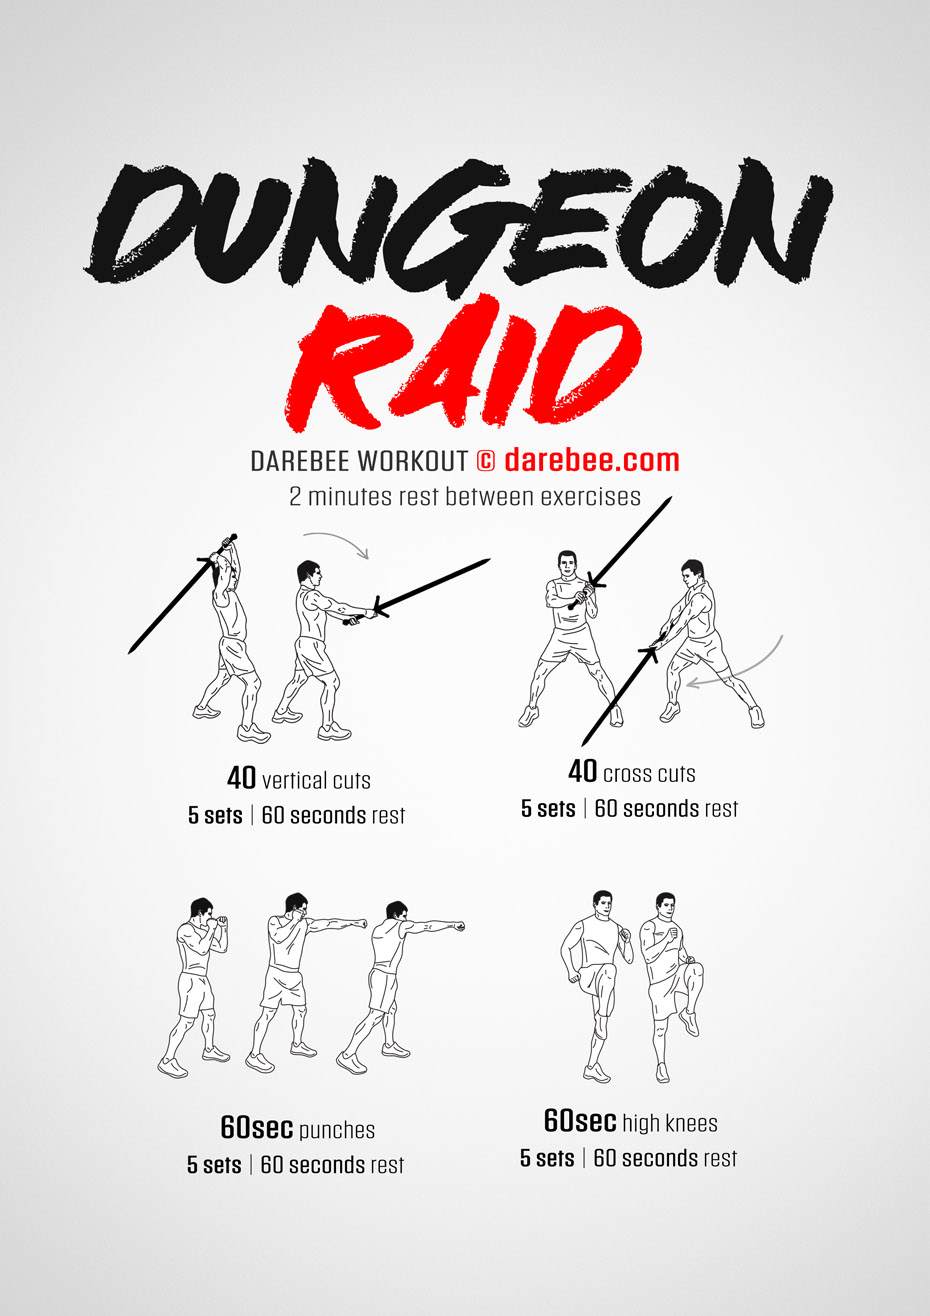 Dungeon Raid is a DAREBEE total body strength workout that also activates your cardiovascular and aerobic system for that total body workout feeling..